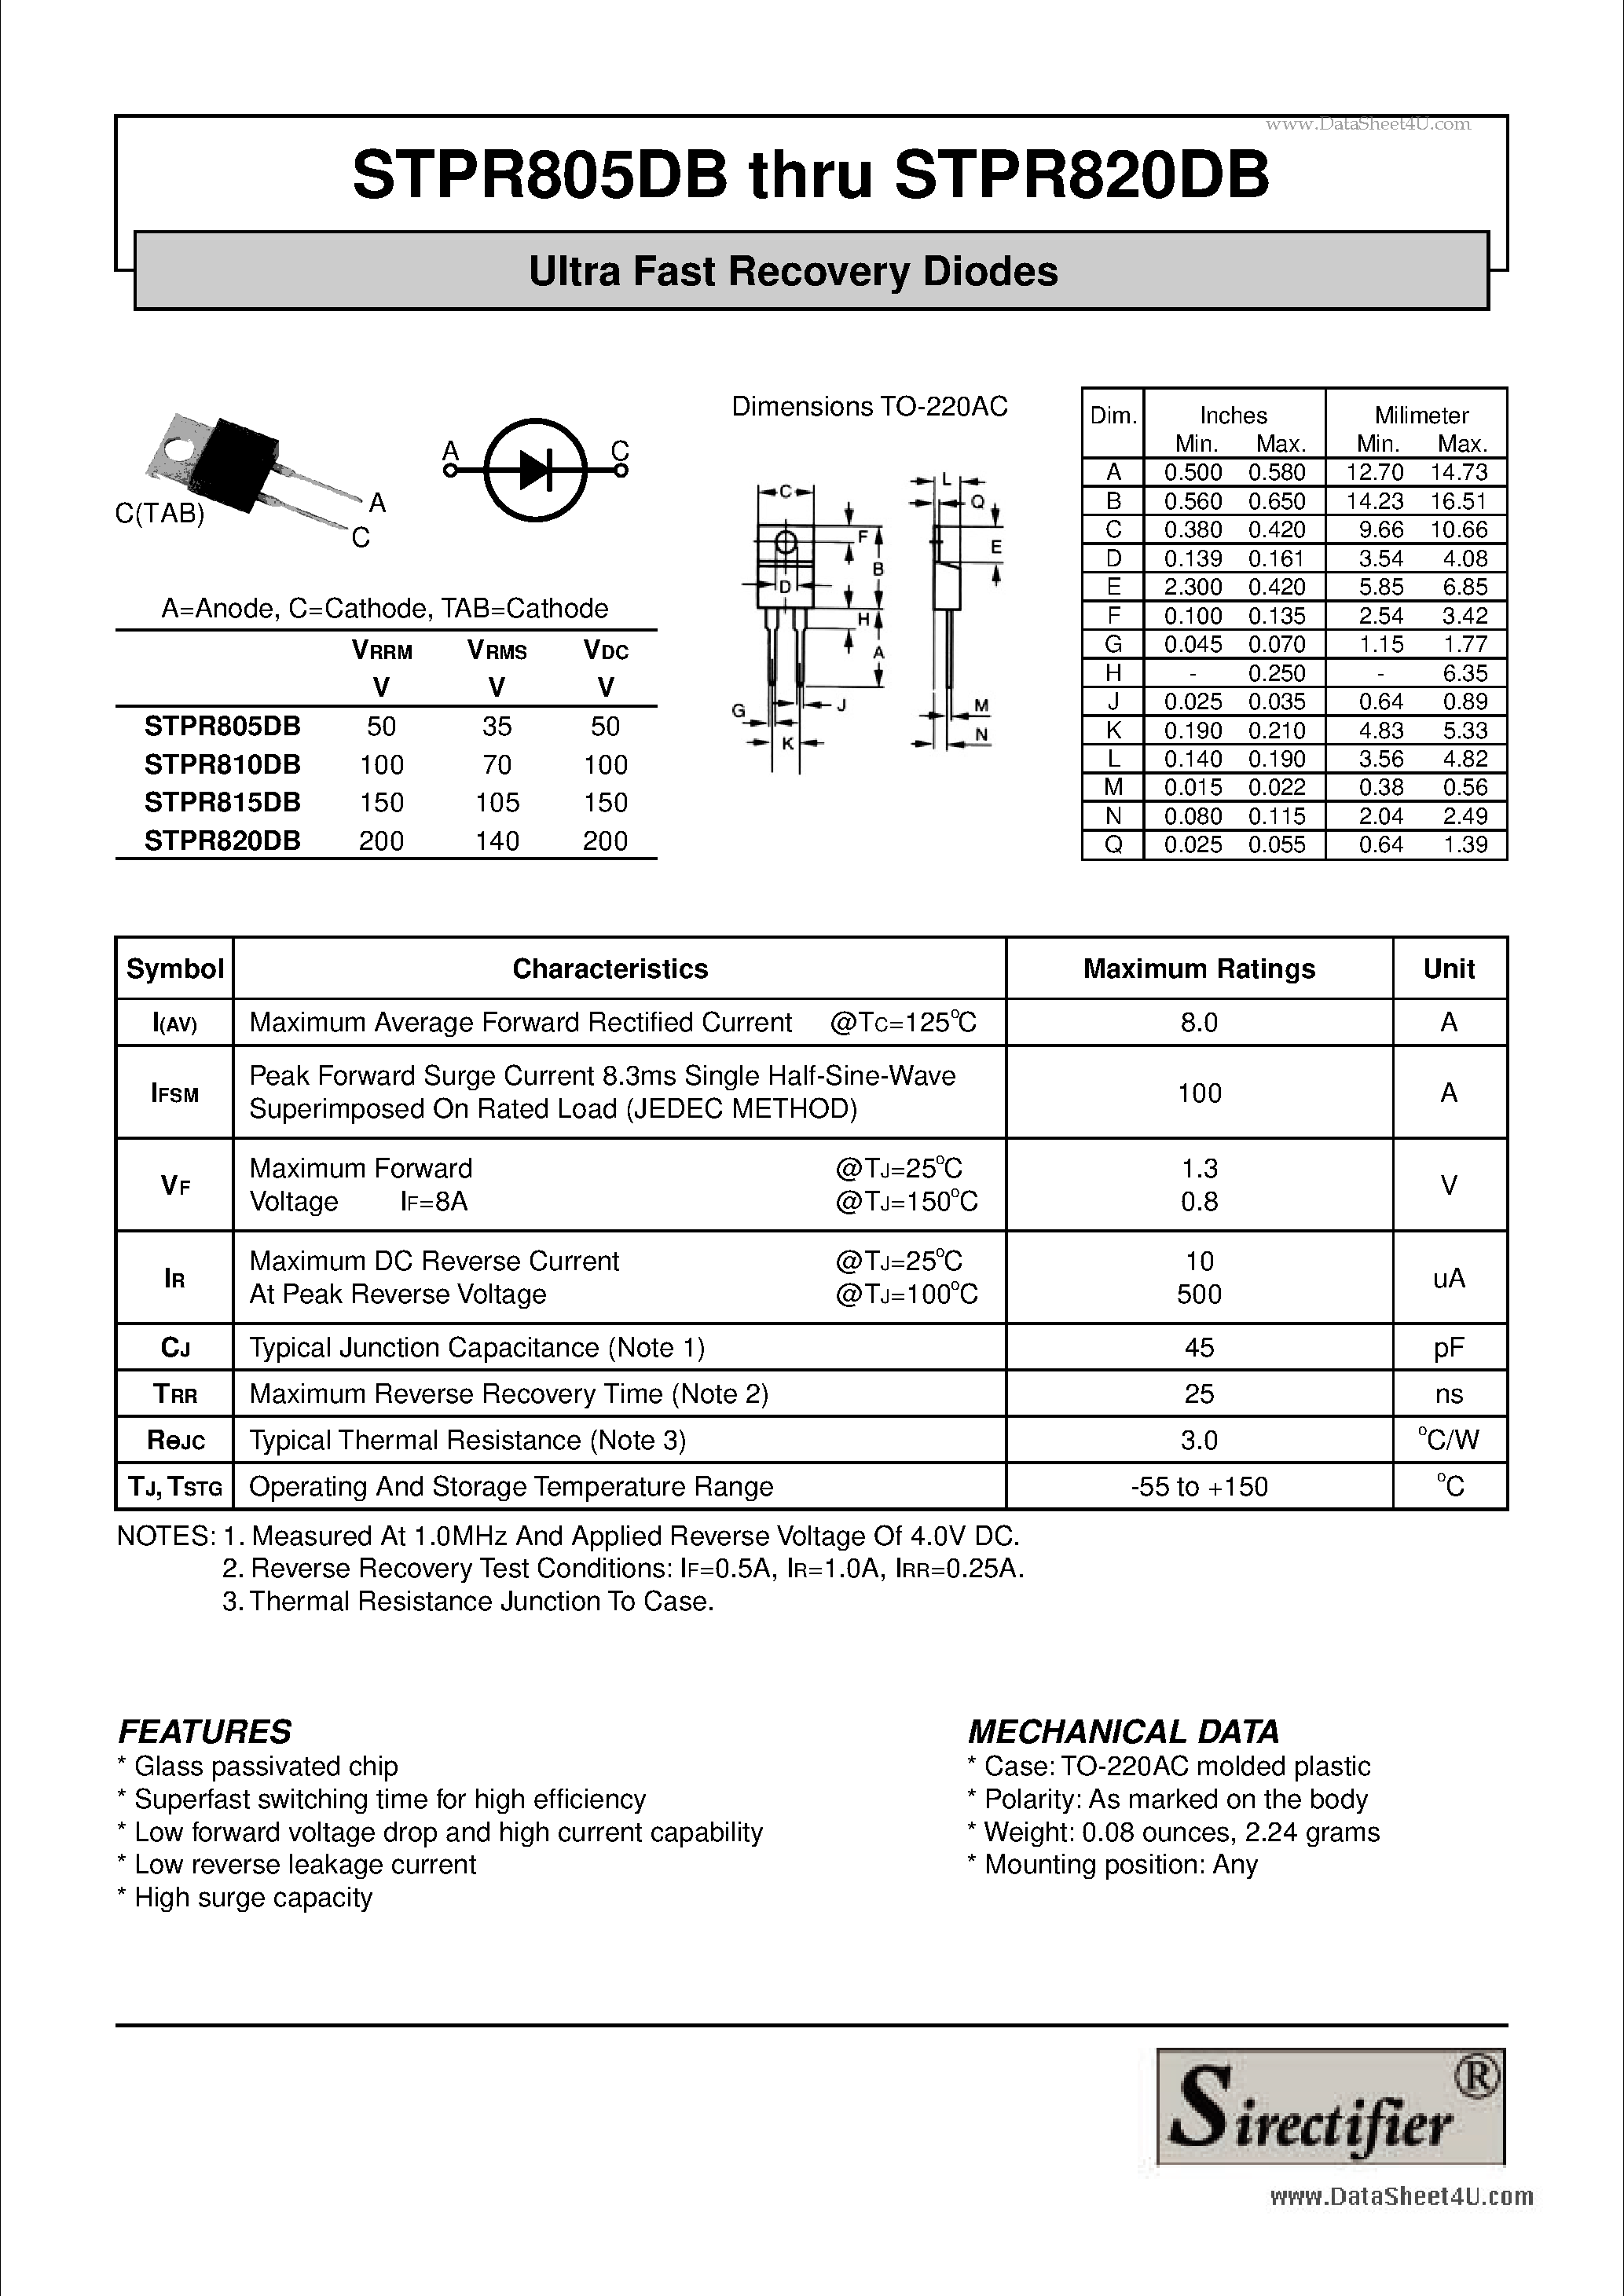 Даташит STPR805DB - Ultra Fast Recovery Diodes страница 1